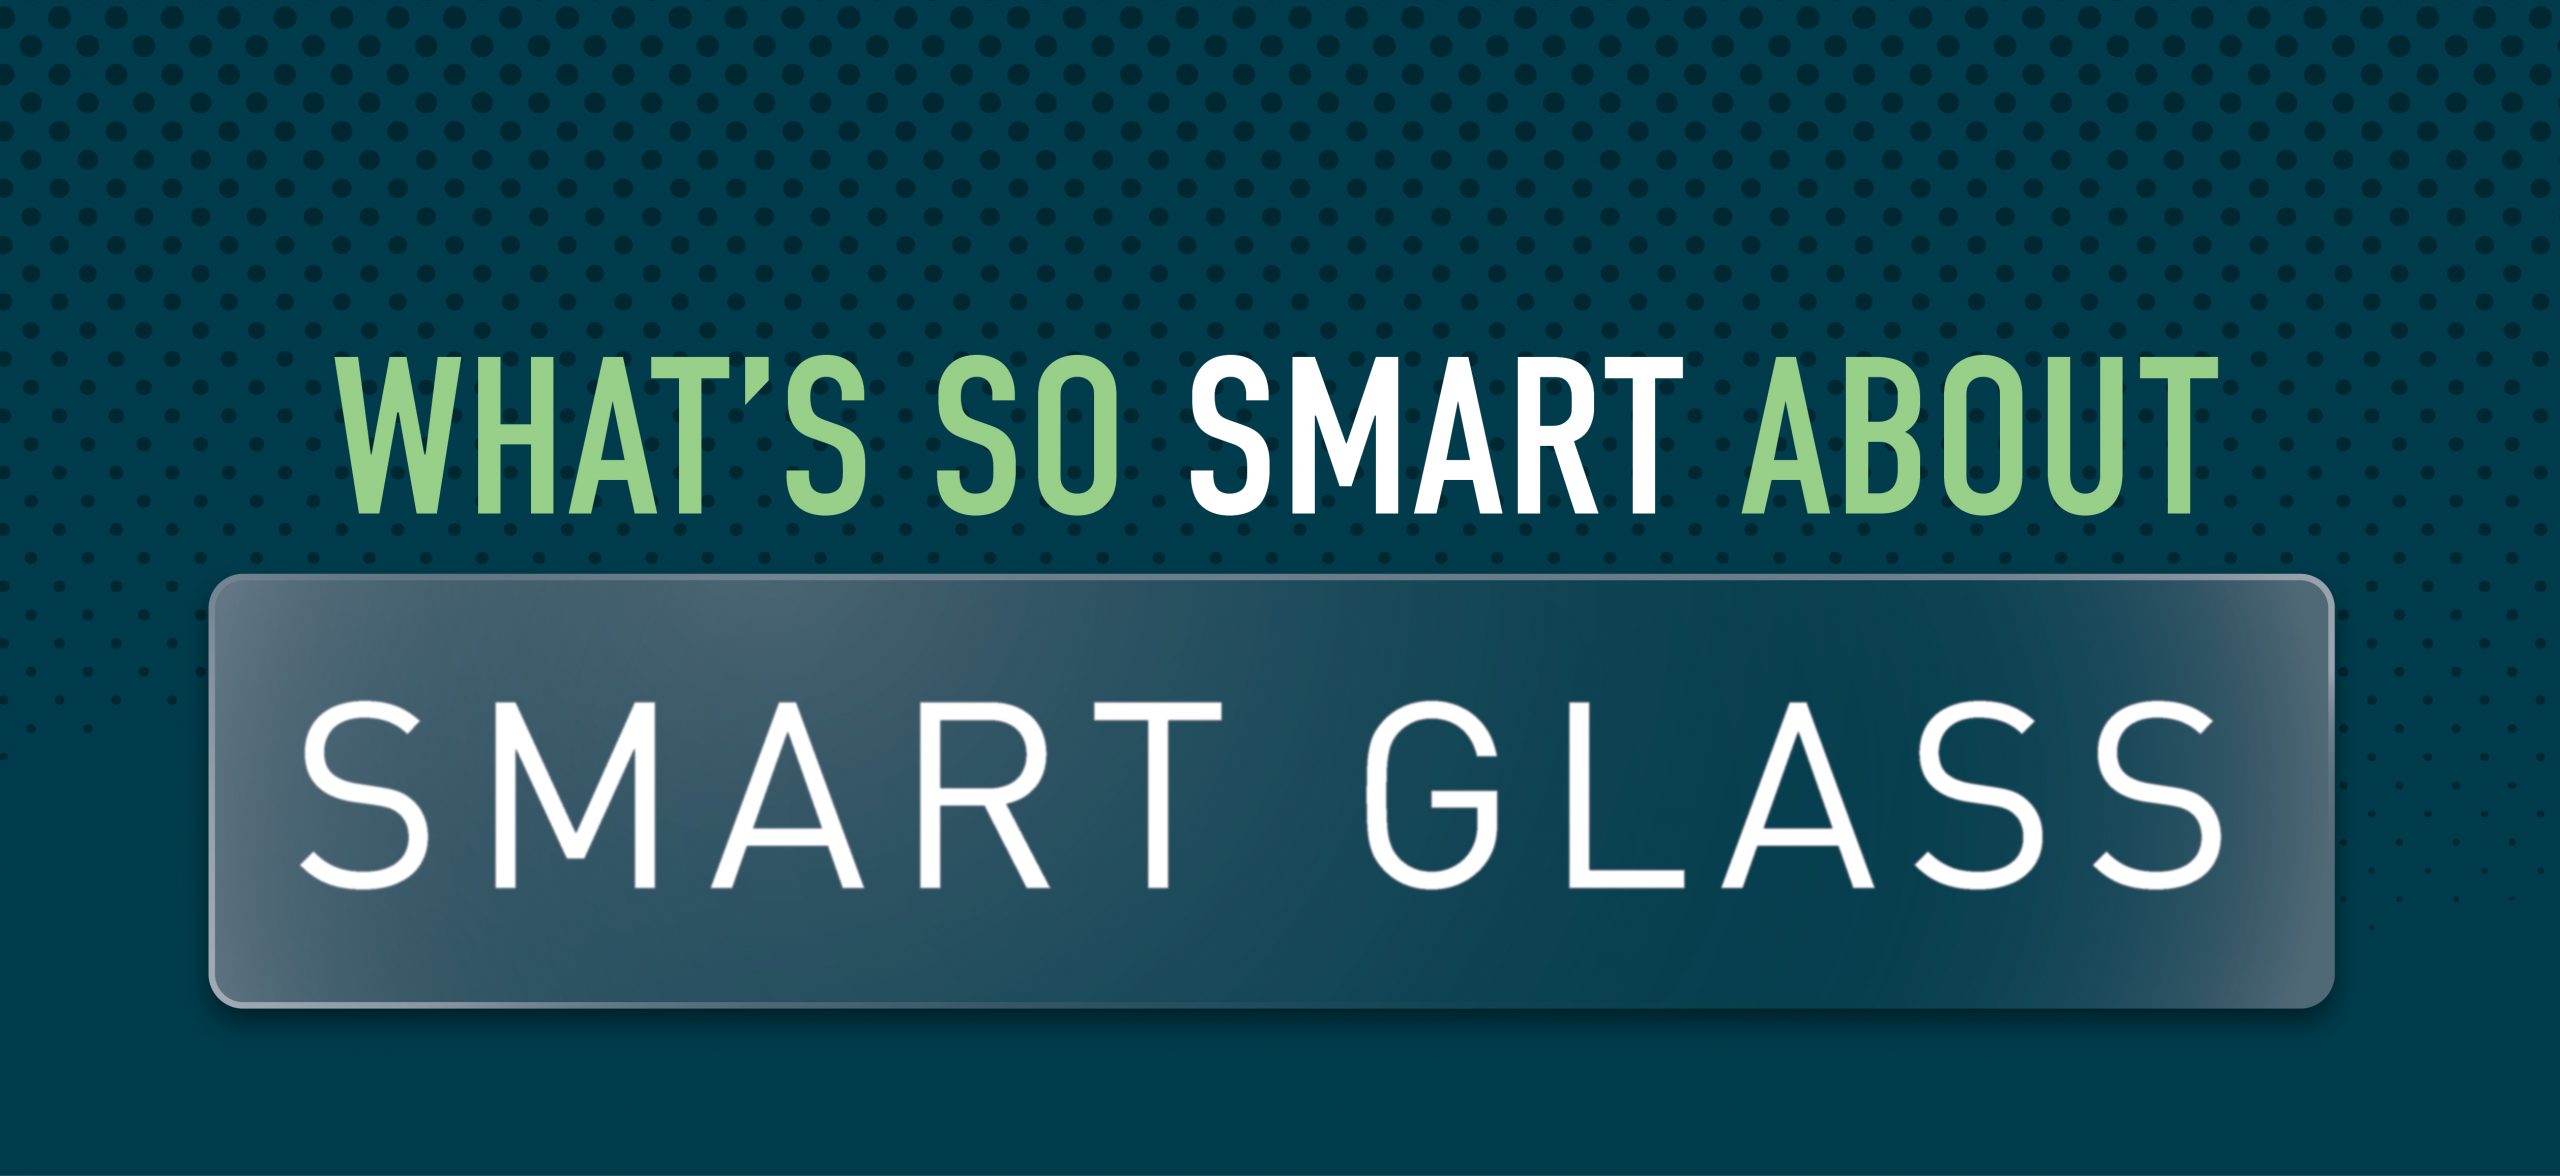 What’s So Smart about Smart Glass?